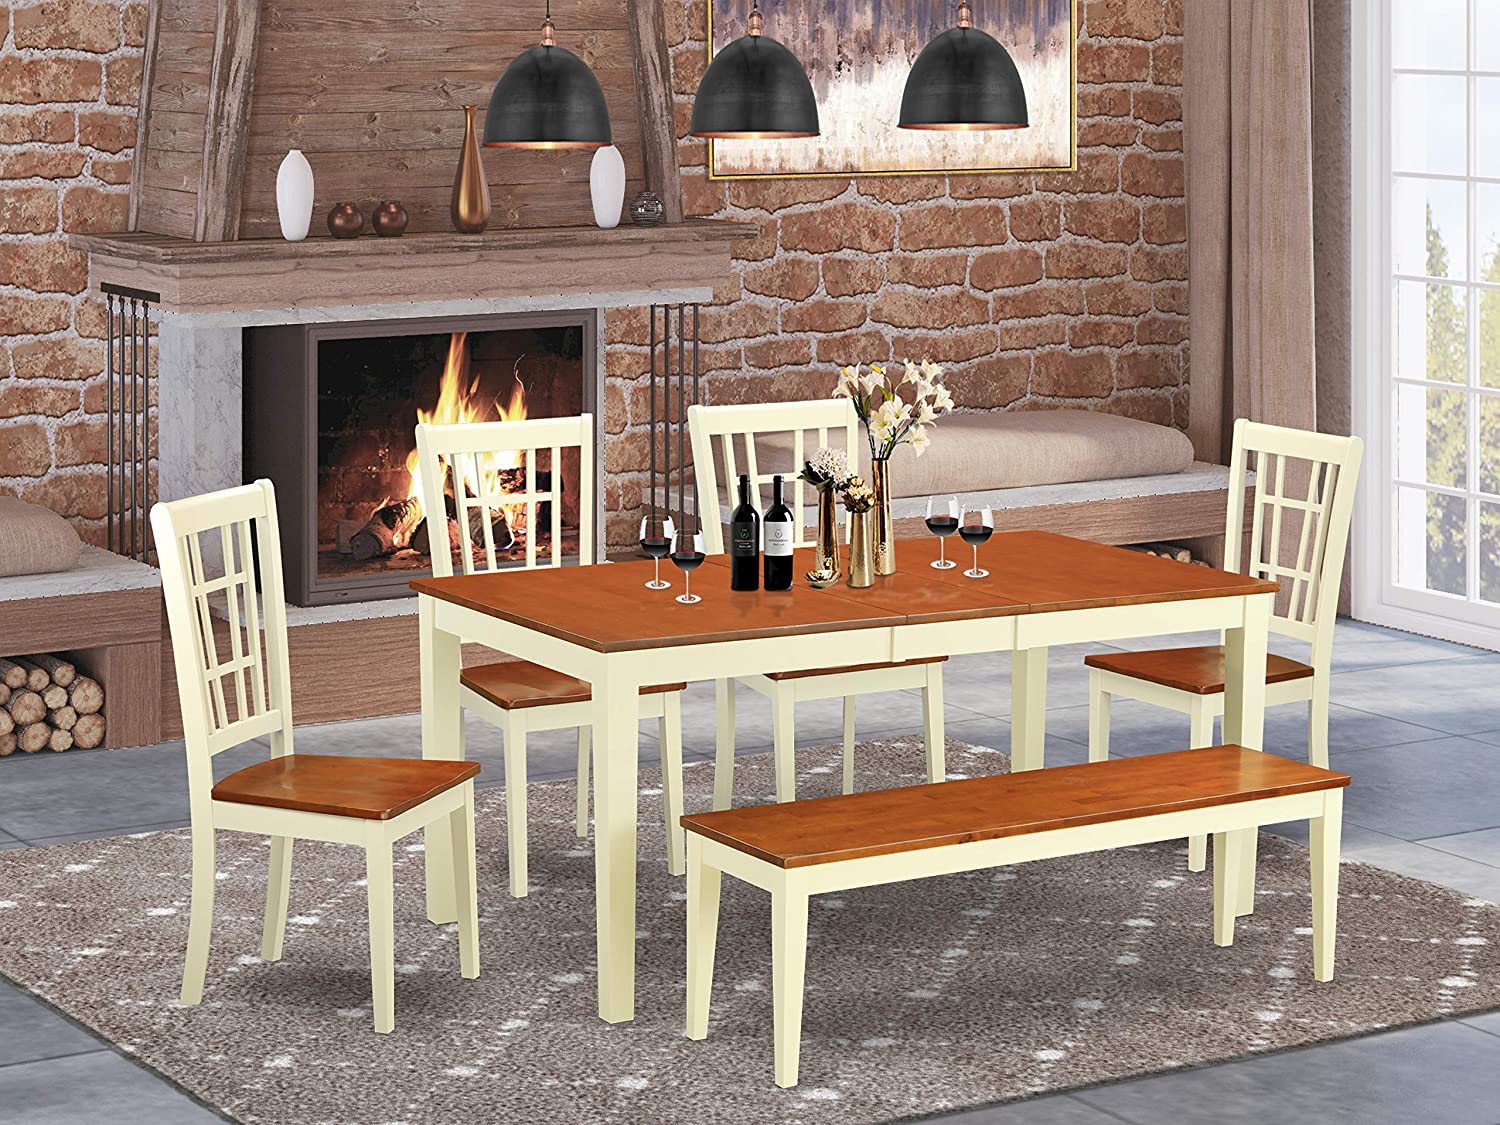 6 Pc Dining Room Set With Bench